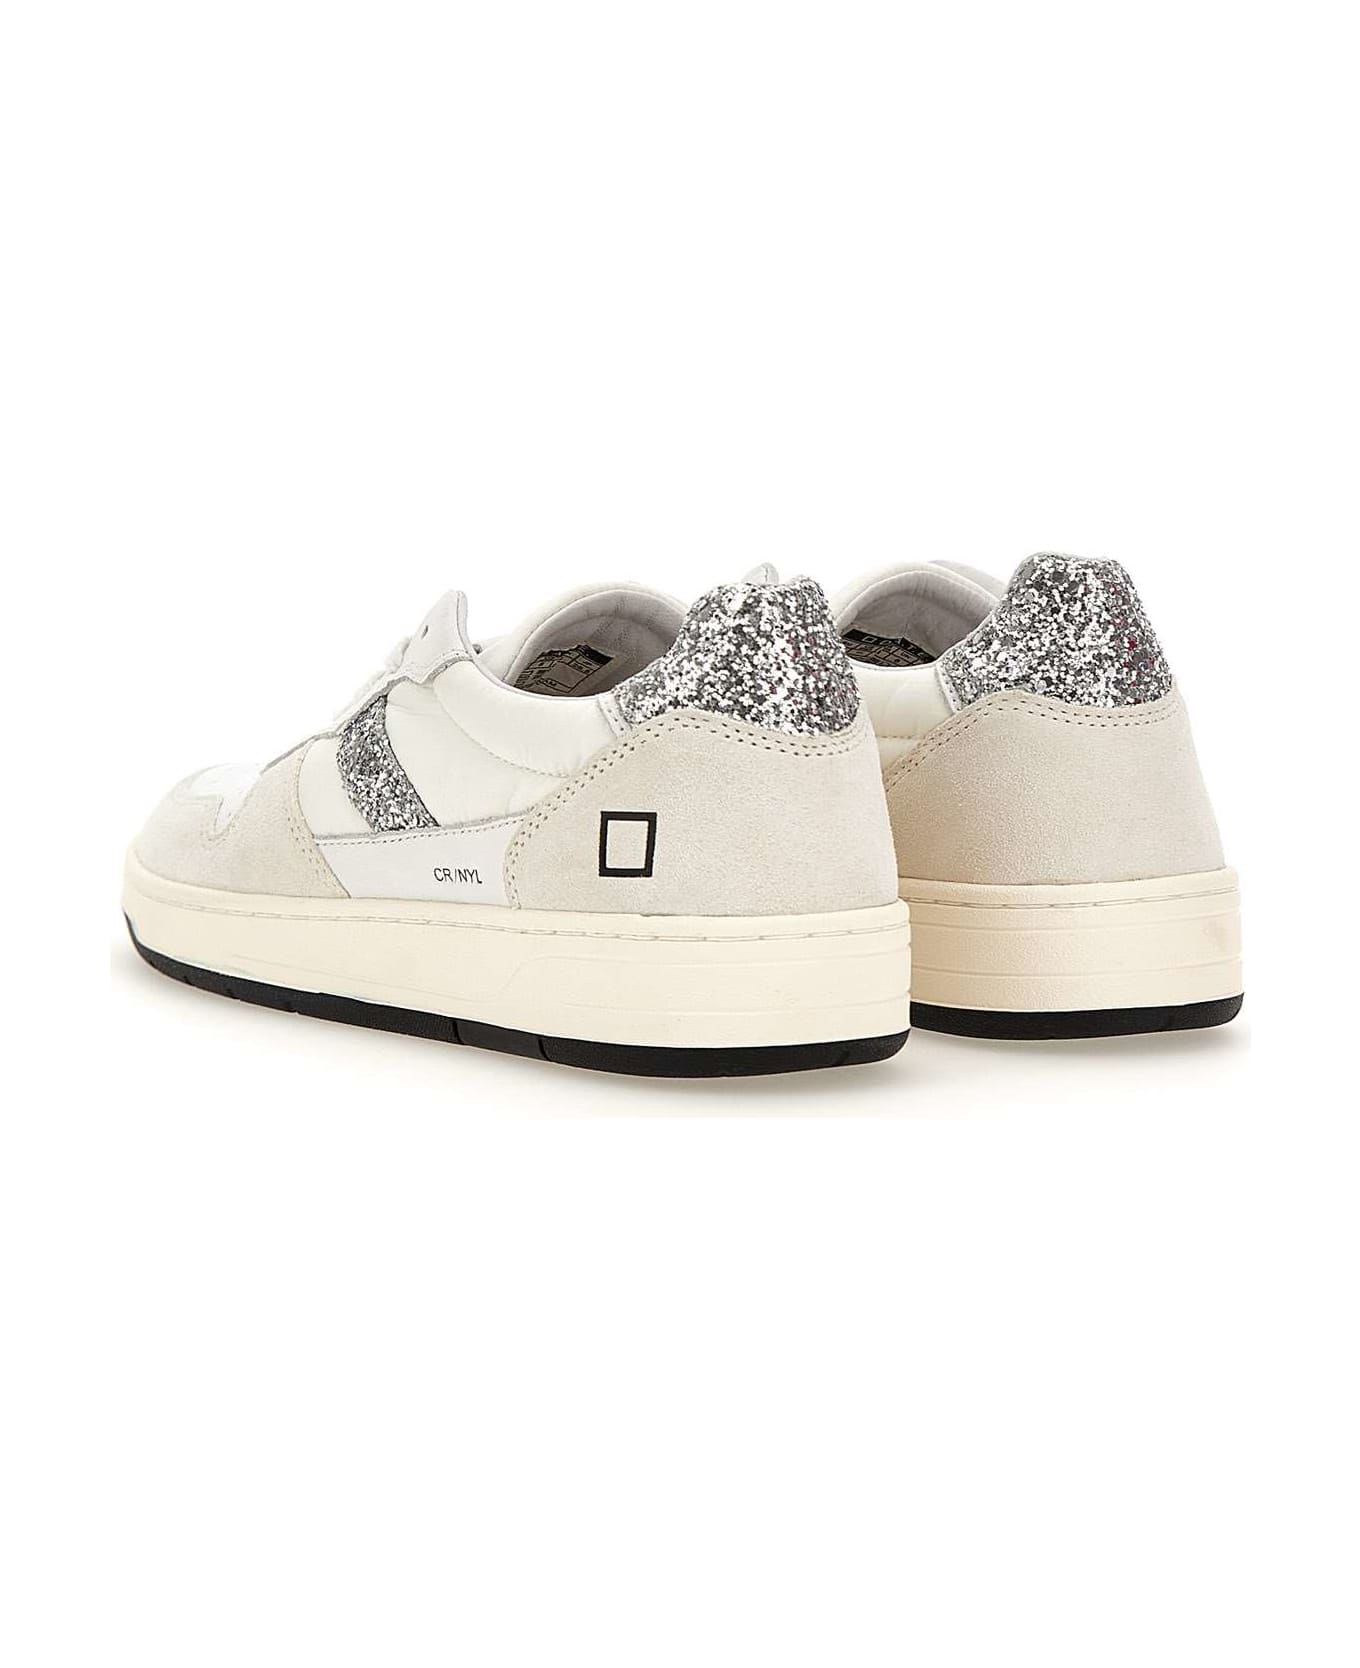 D.A.T.E. 'court 2.0' Leather Sneakers - Silver スニーカー